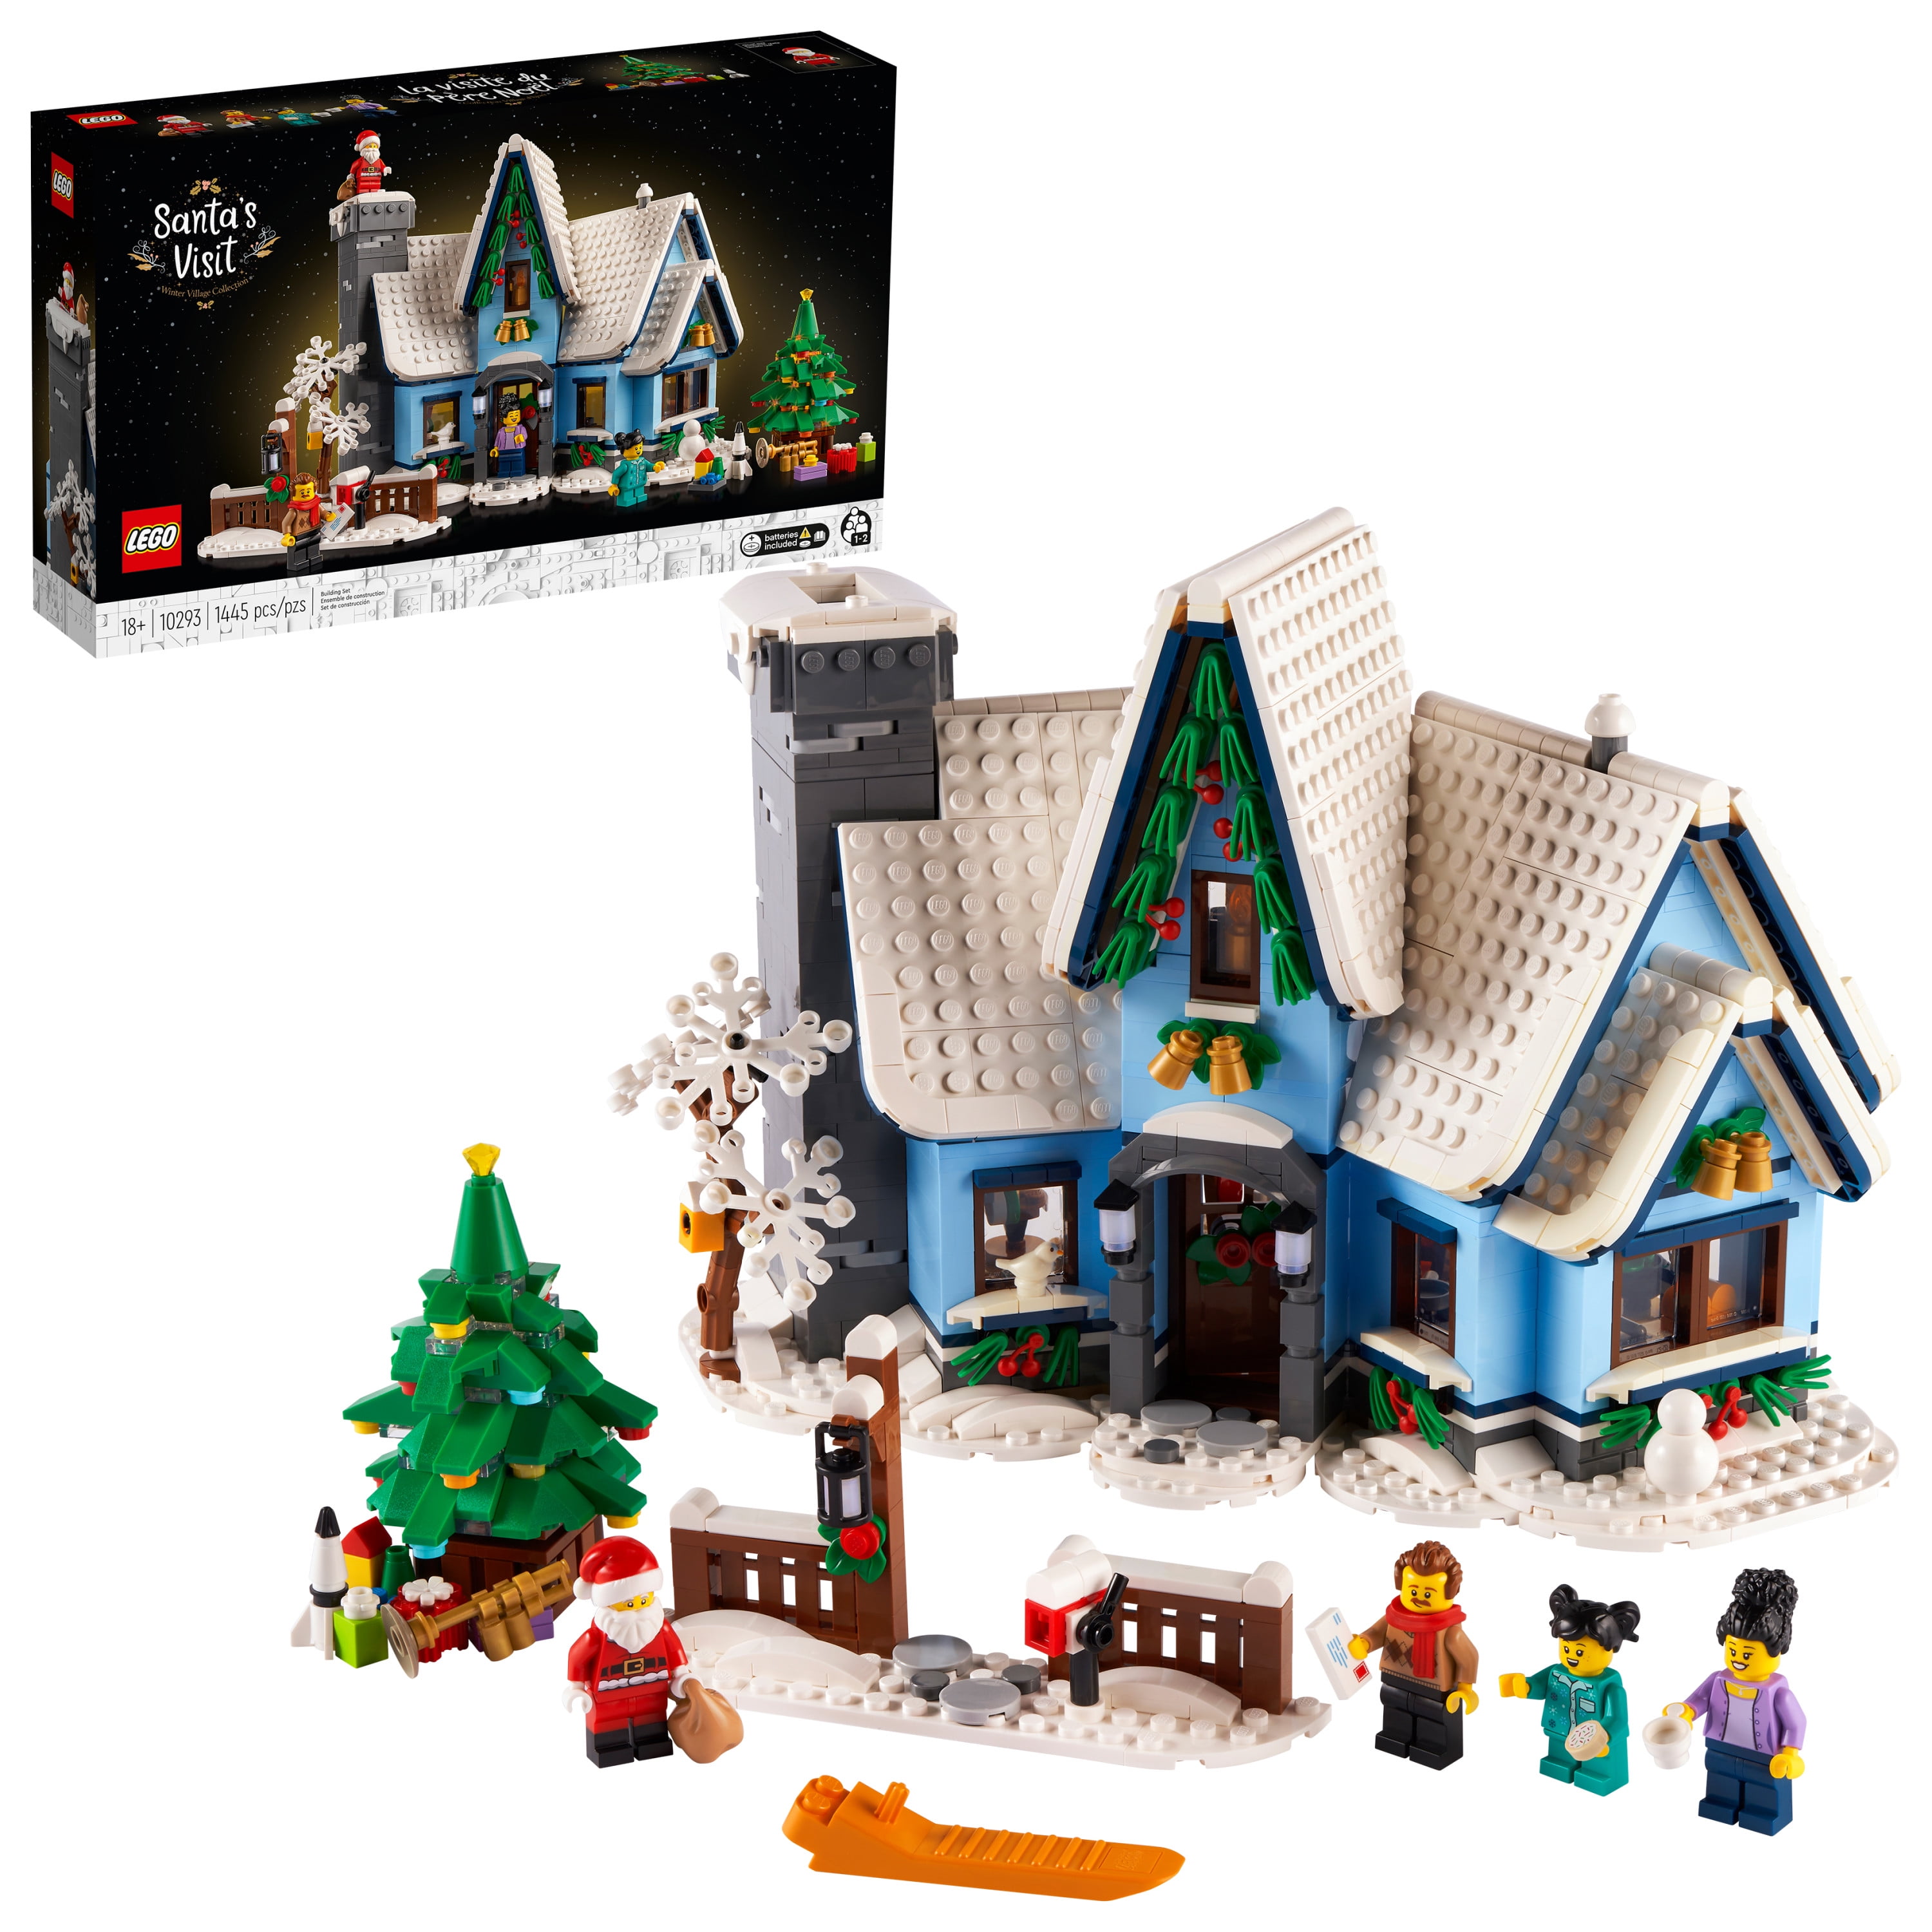 LEGO Icons Visit 10293 Christmas House Model Building Set for Adults and Families, Festive Home Décor with Xmas Tree, Gift - Walmart.com